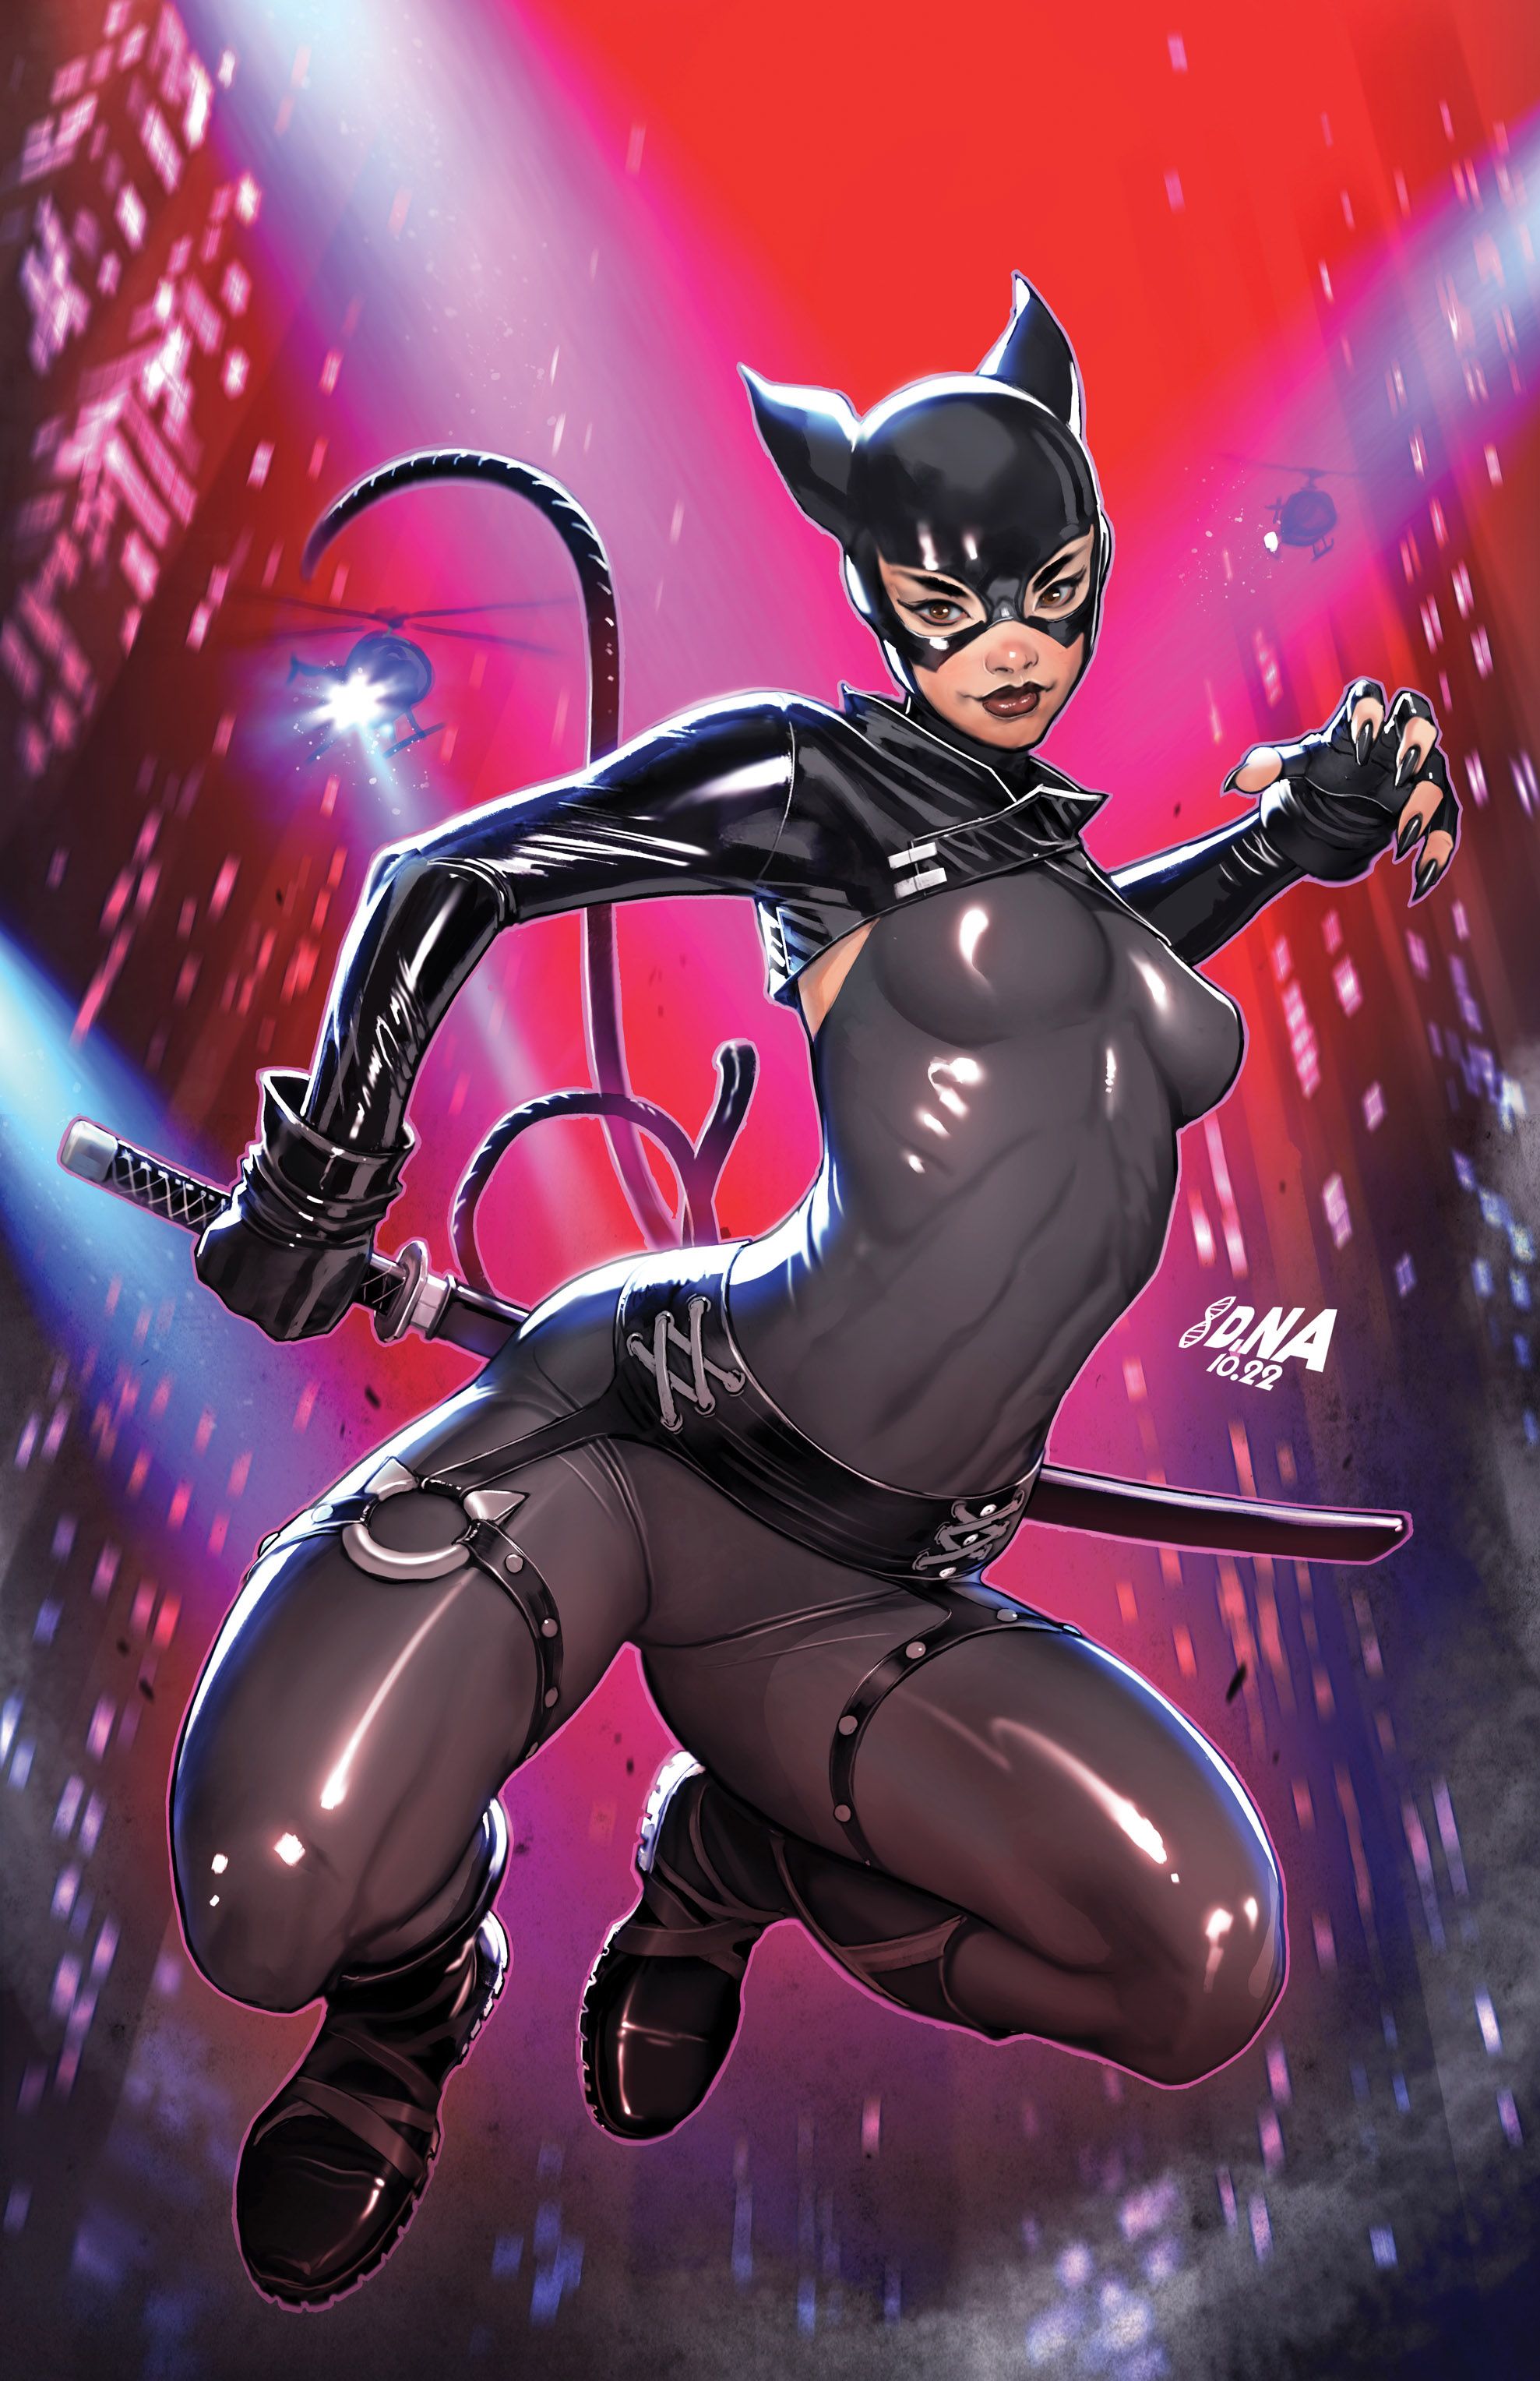 Catwoman 52